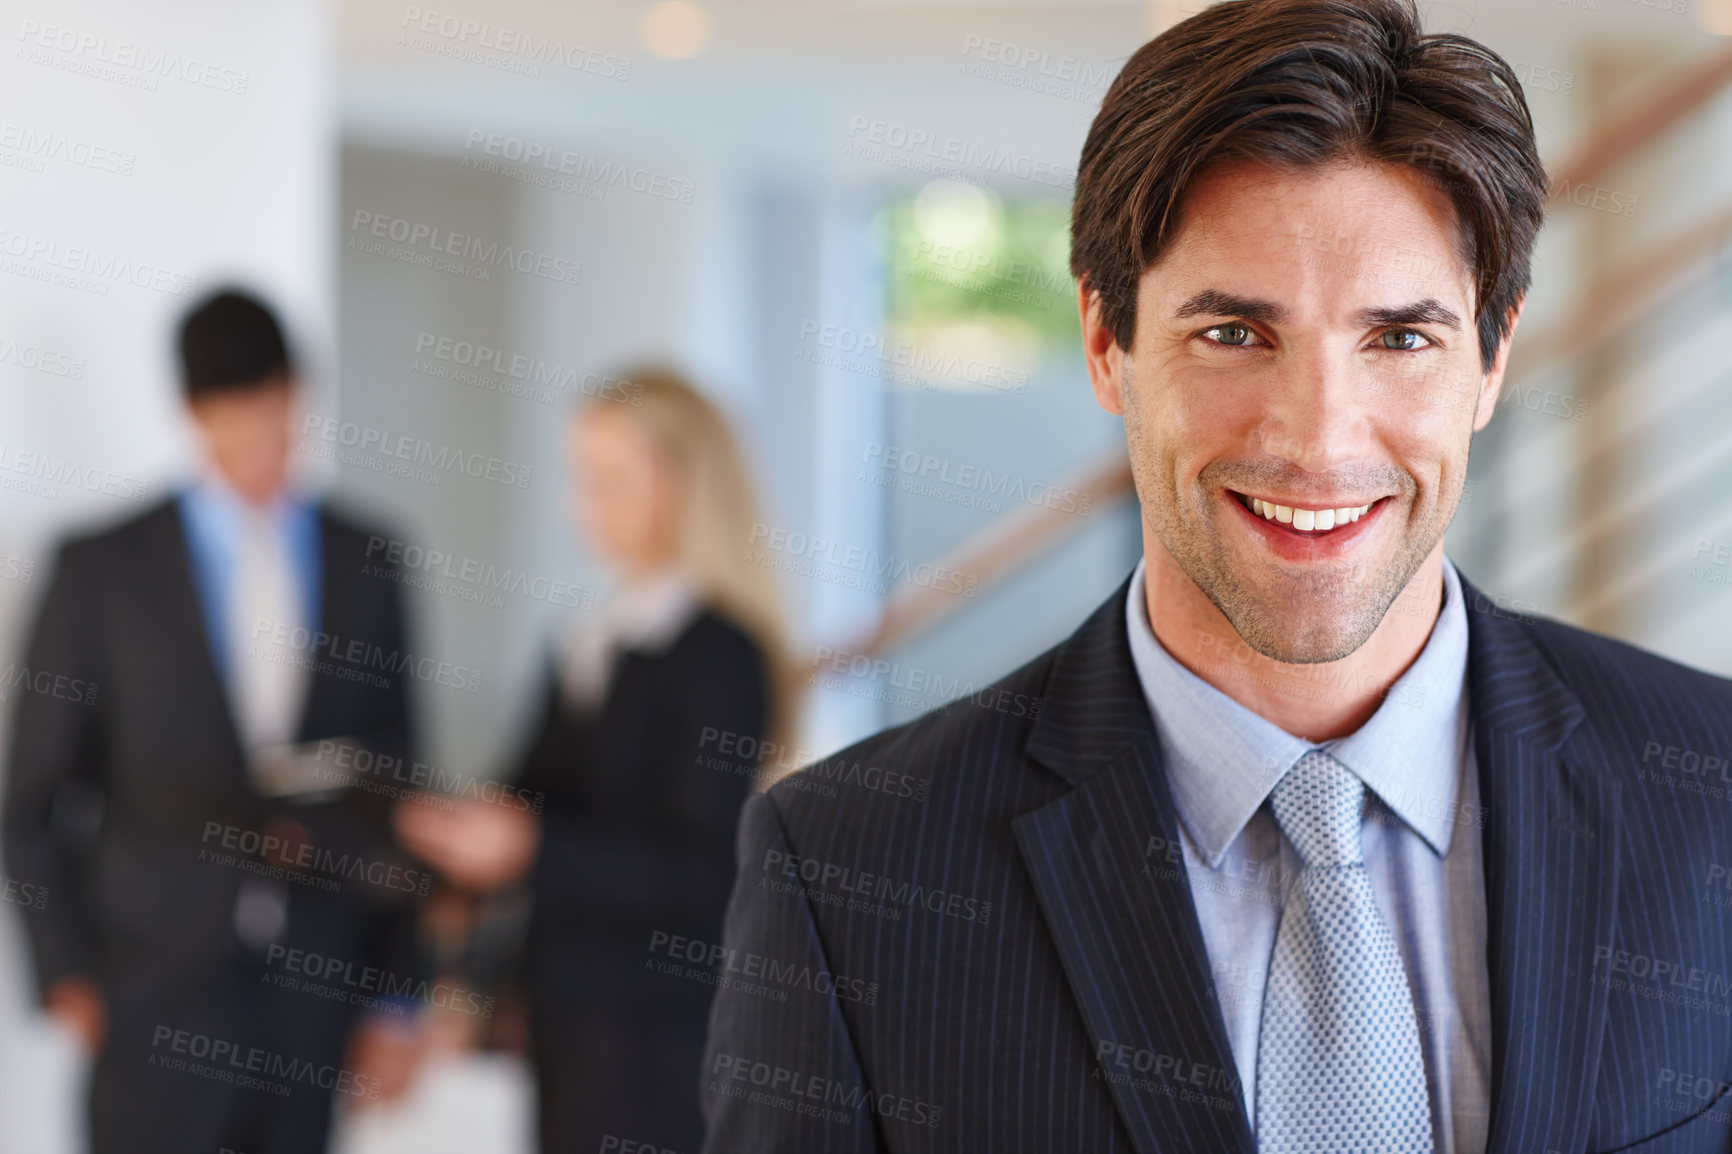 Buy stock photo Portrait of a businessman standing indoors with two colleagues in the background